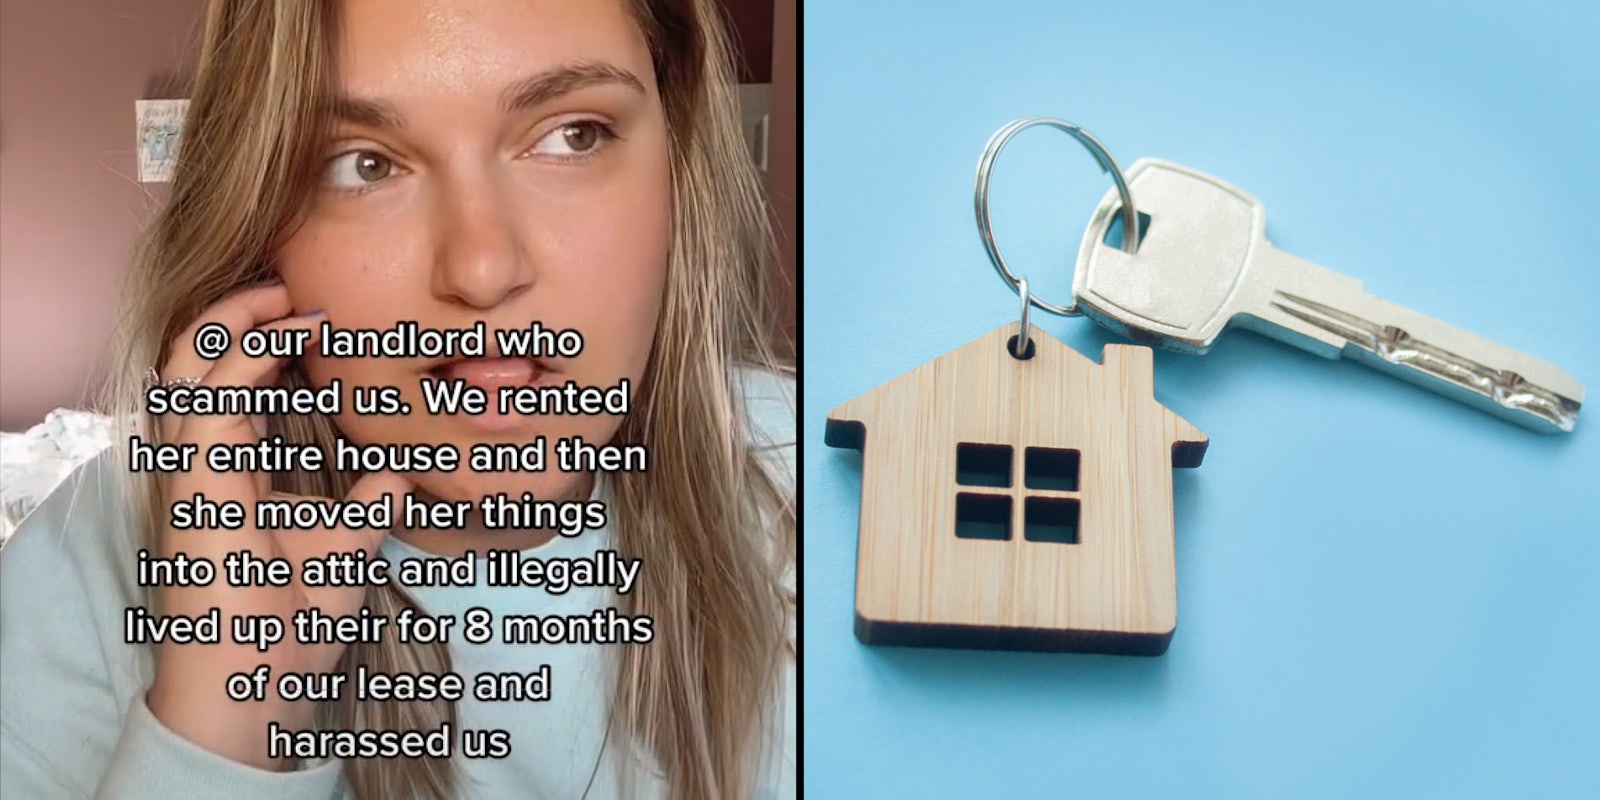 woman hand on cheek caption '@ our landlord who scammed us. We rented her entire house and then she moved her things into the attic and illegally lived up there for 8 months of our lease and harassed us' (l) wooden house on keyring with silver key on blue background (r)